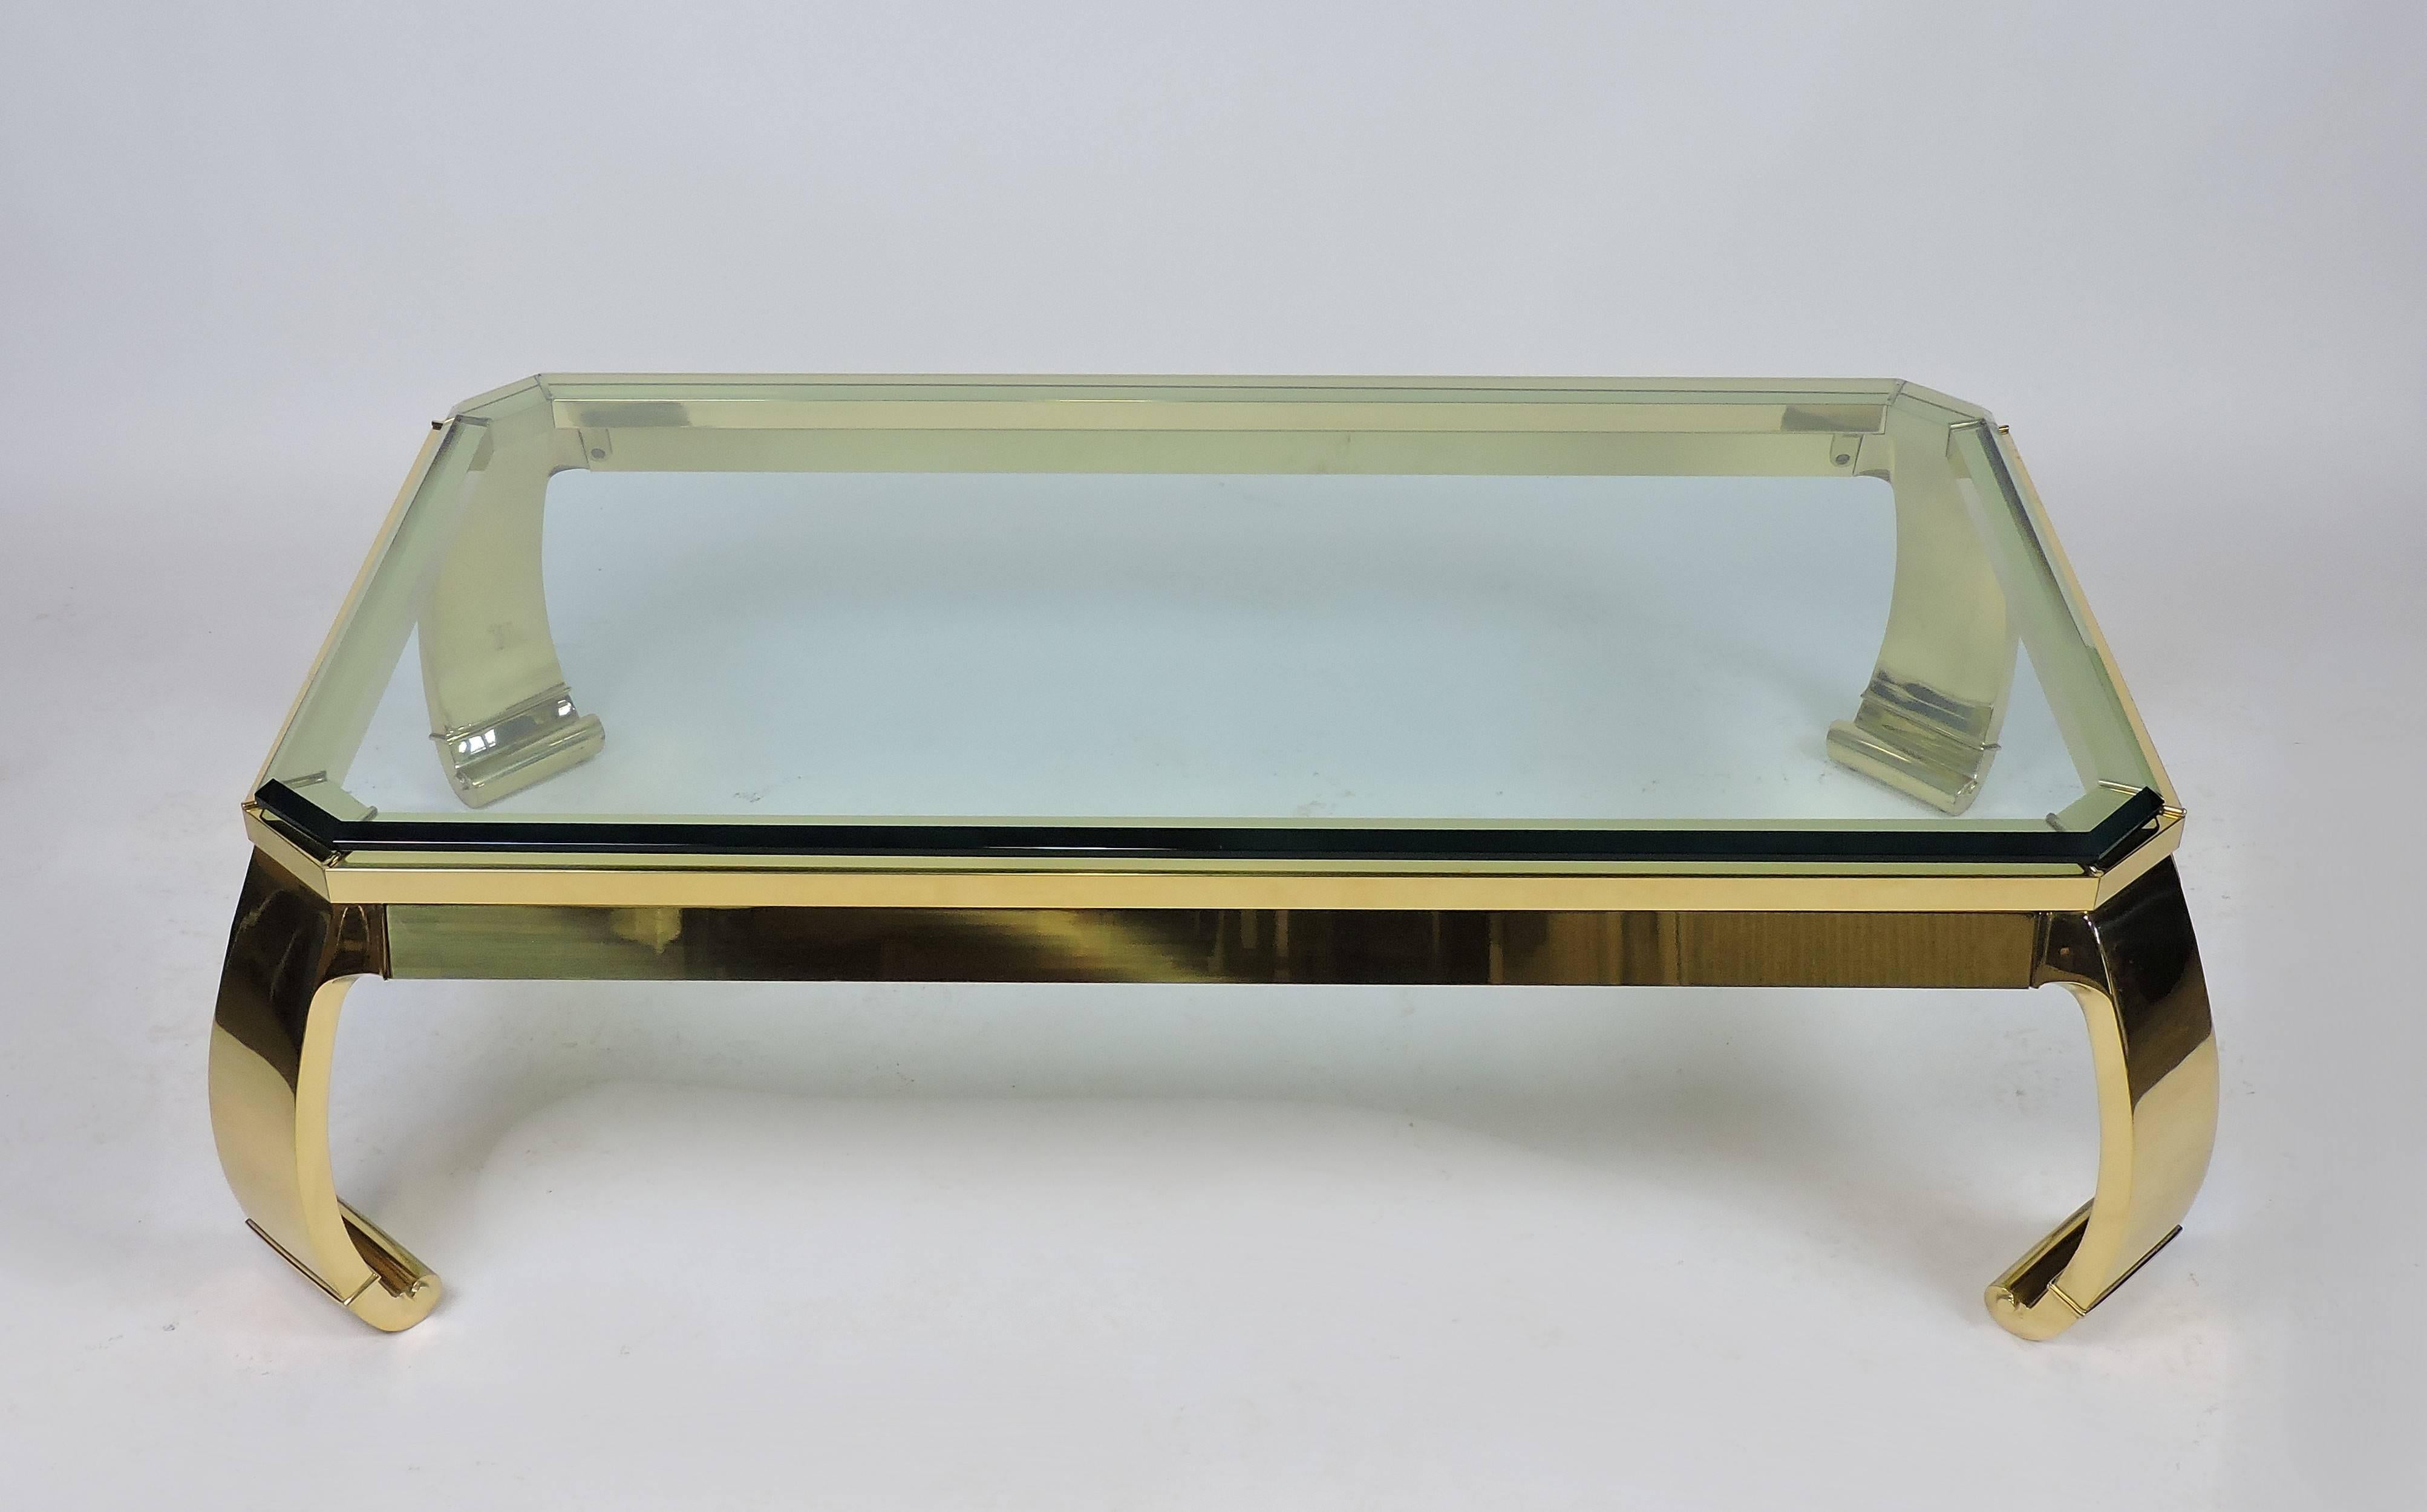 Beautiful and top quality Asian Style Italian brass and glass coffee table. This heavy and well made table has a solid brass base with a three-quarter inch thick beveled glass top. It has a nice clean design with scrolled legs that give it a modern